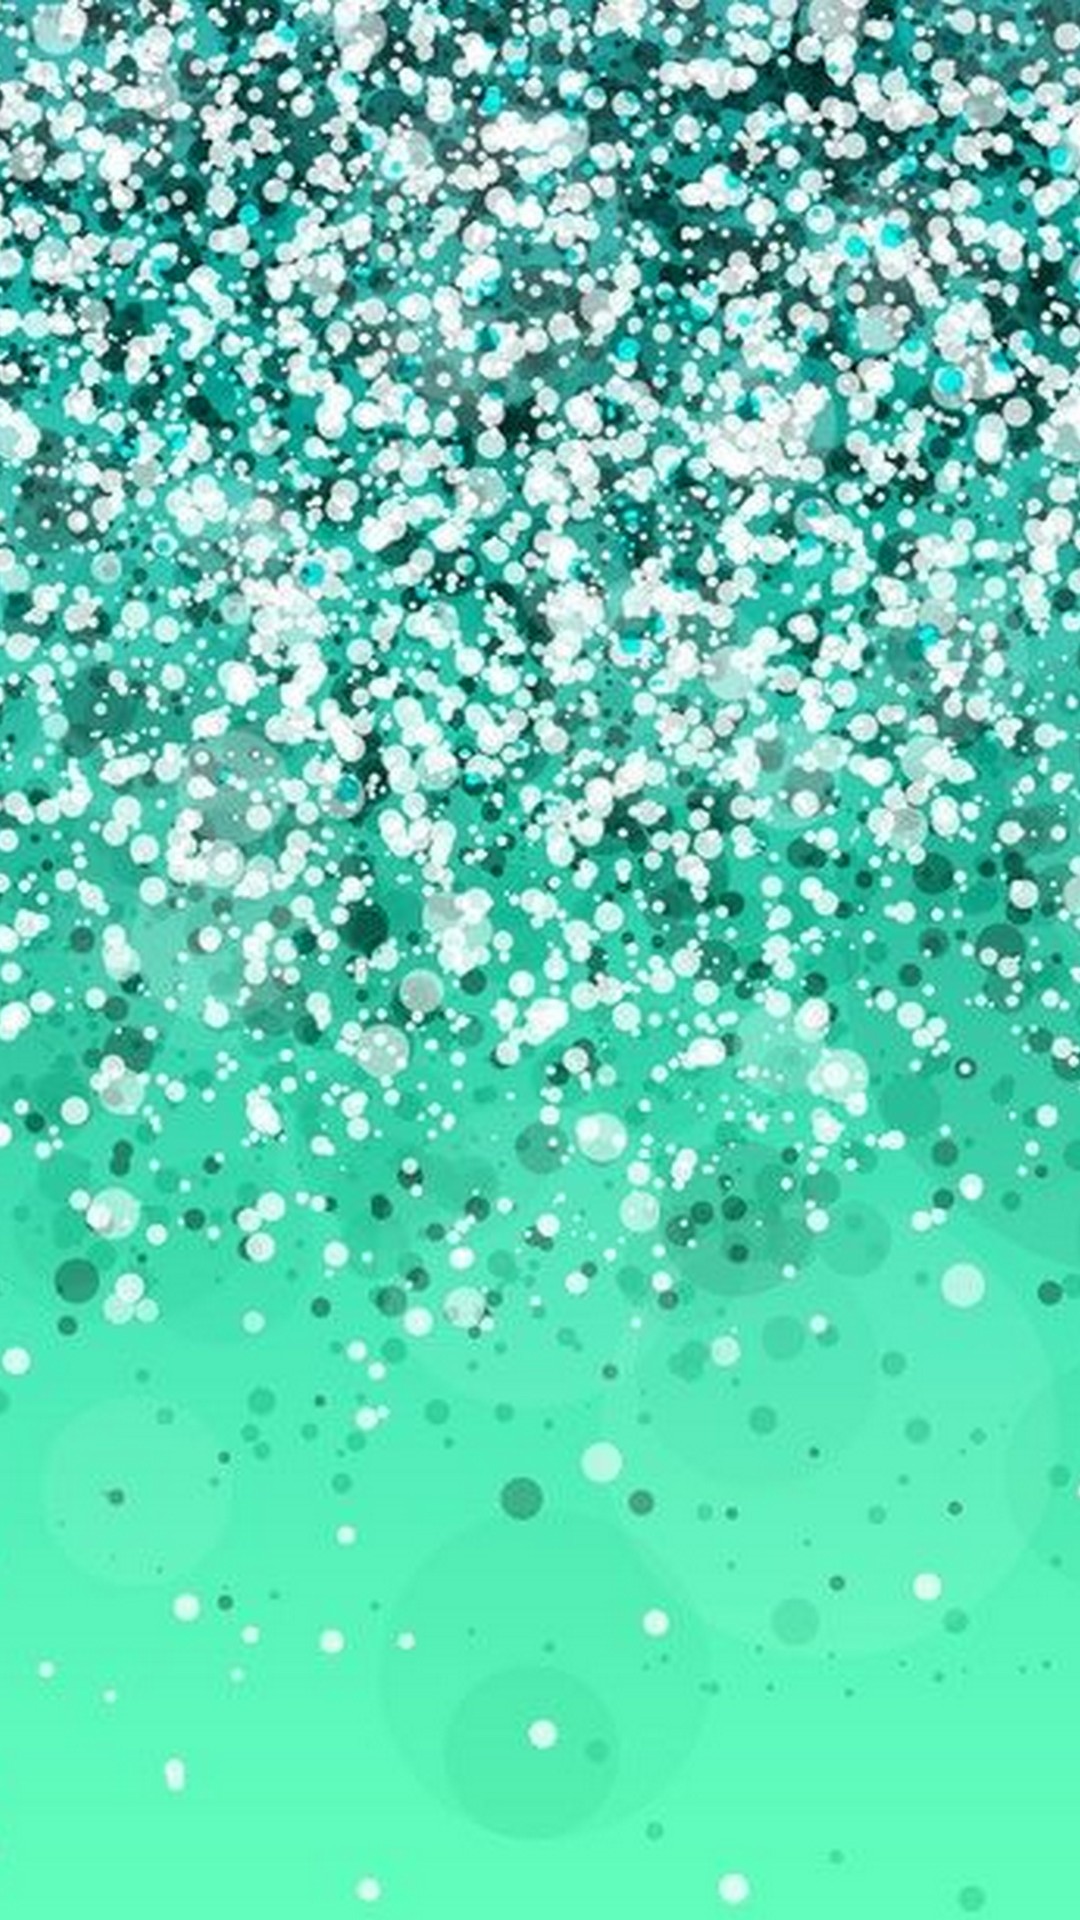 Green Colour Backgrounds For Android With Image Resolution - Mint Green Glitter Background - HD Wallpaper 